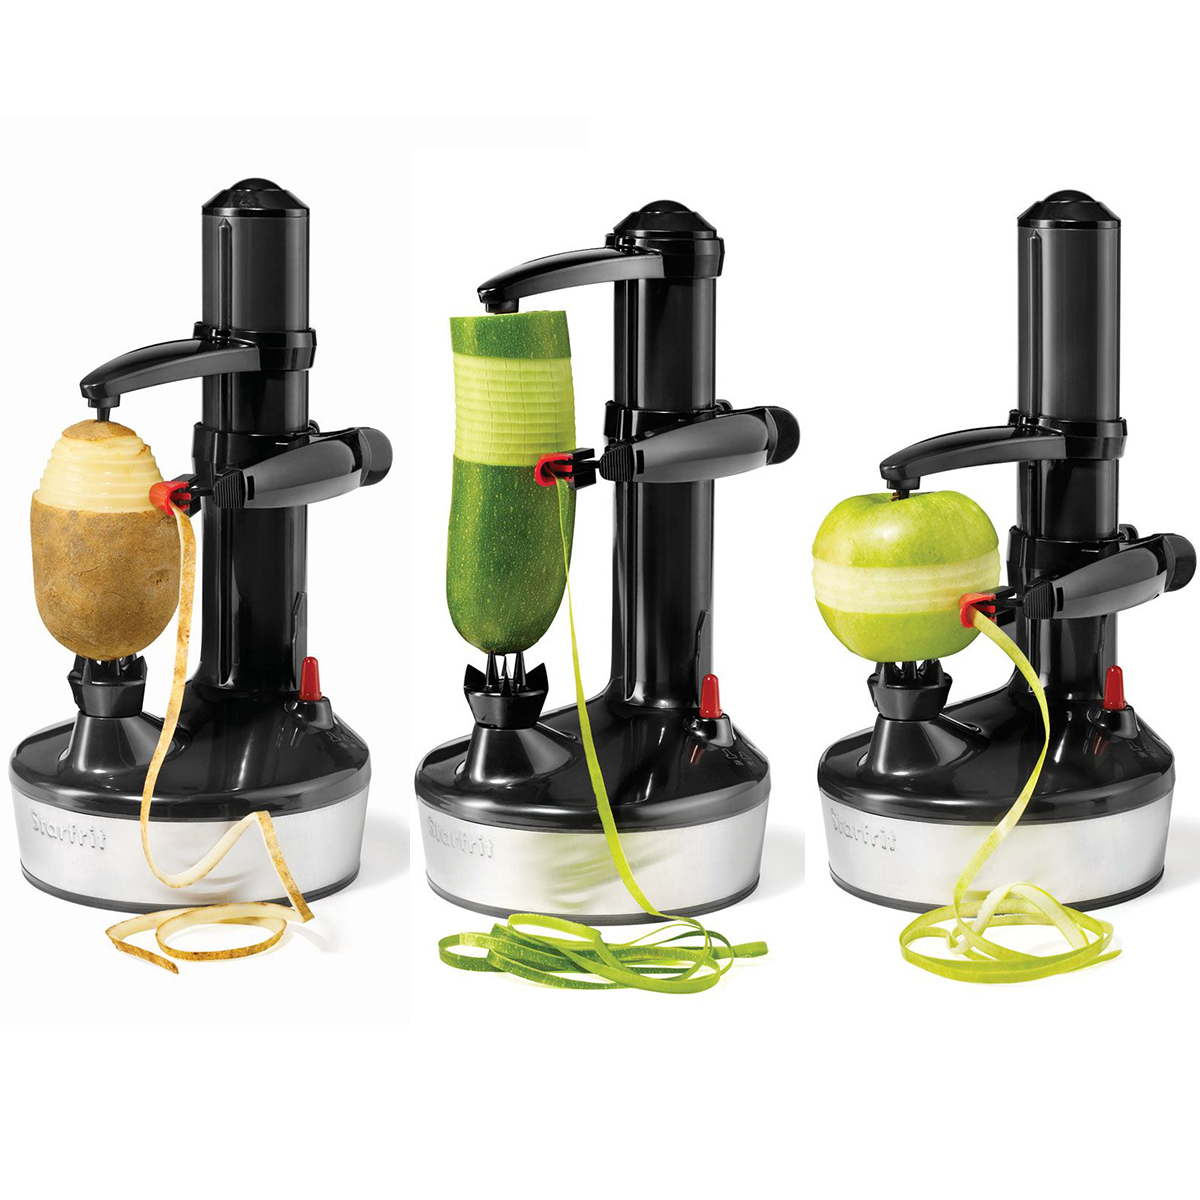 Peel fruit and veggies in '10 seconds' with Starfrit's electric Rotato  Express: $15 (Save 25%)